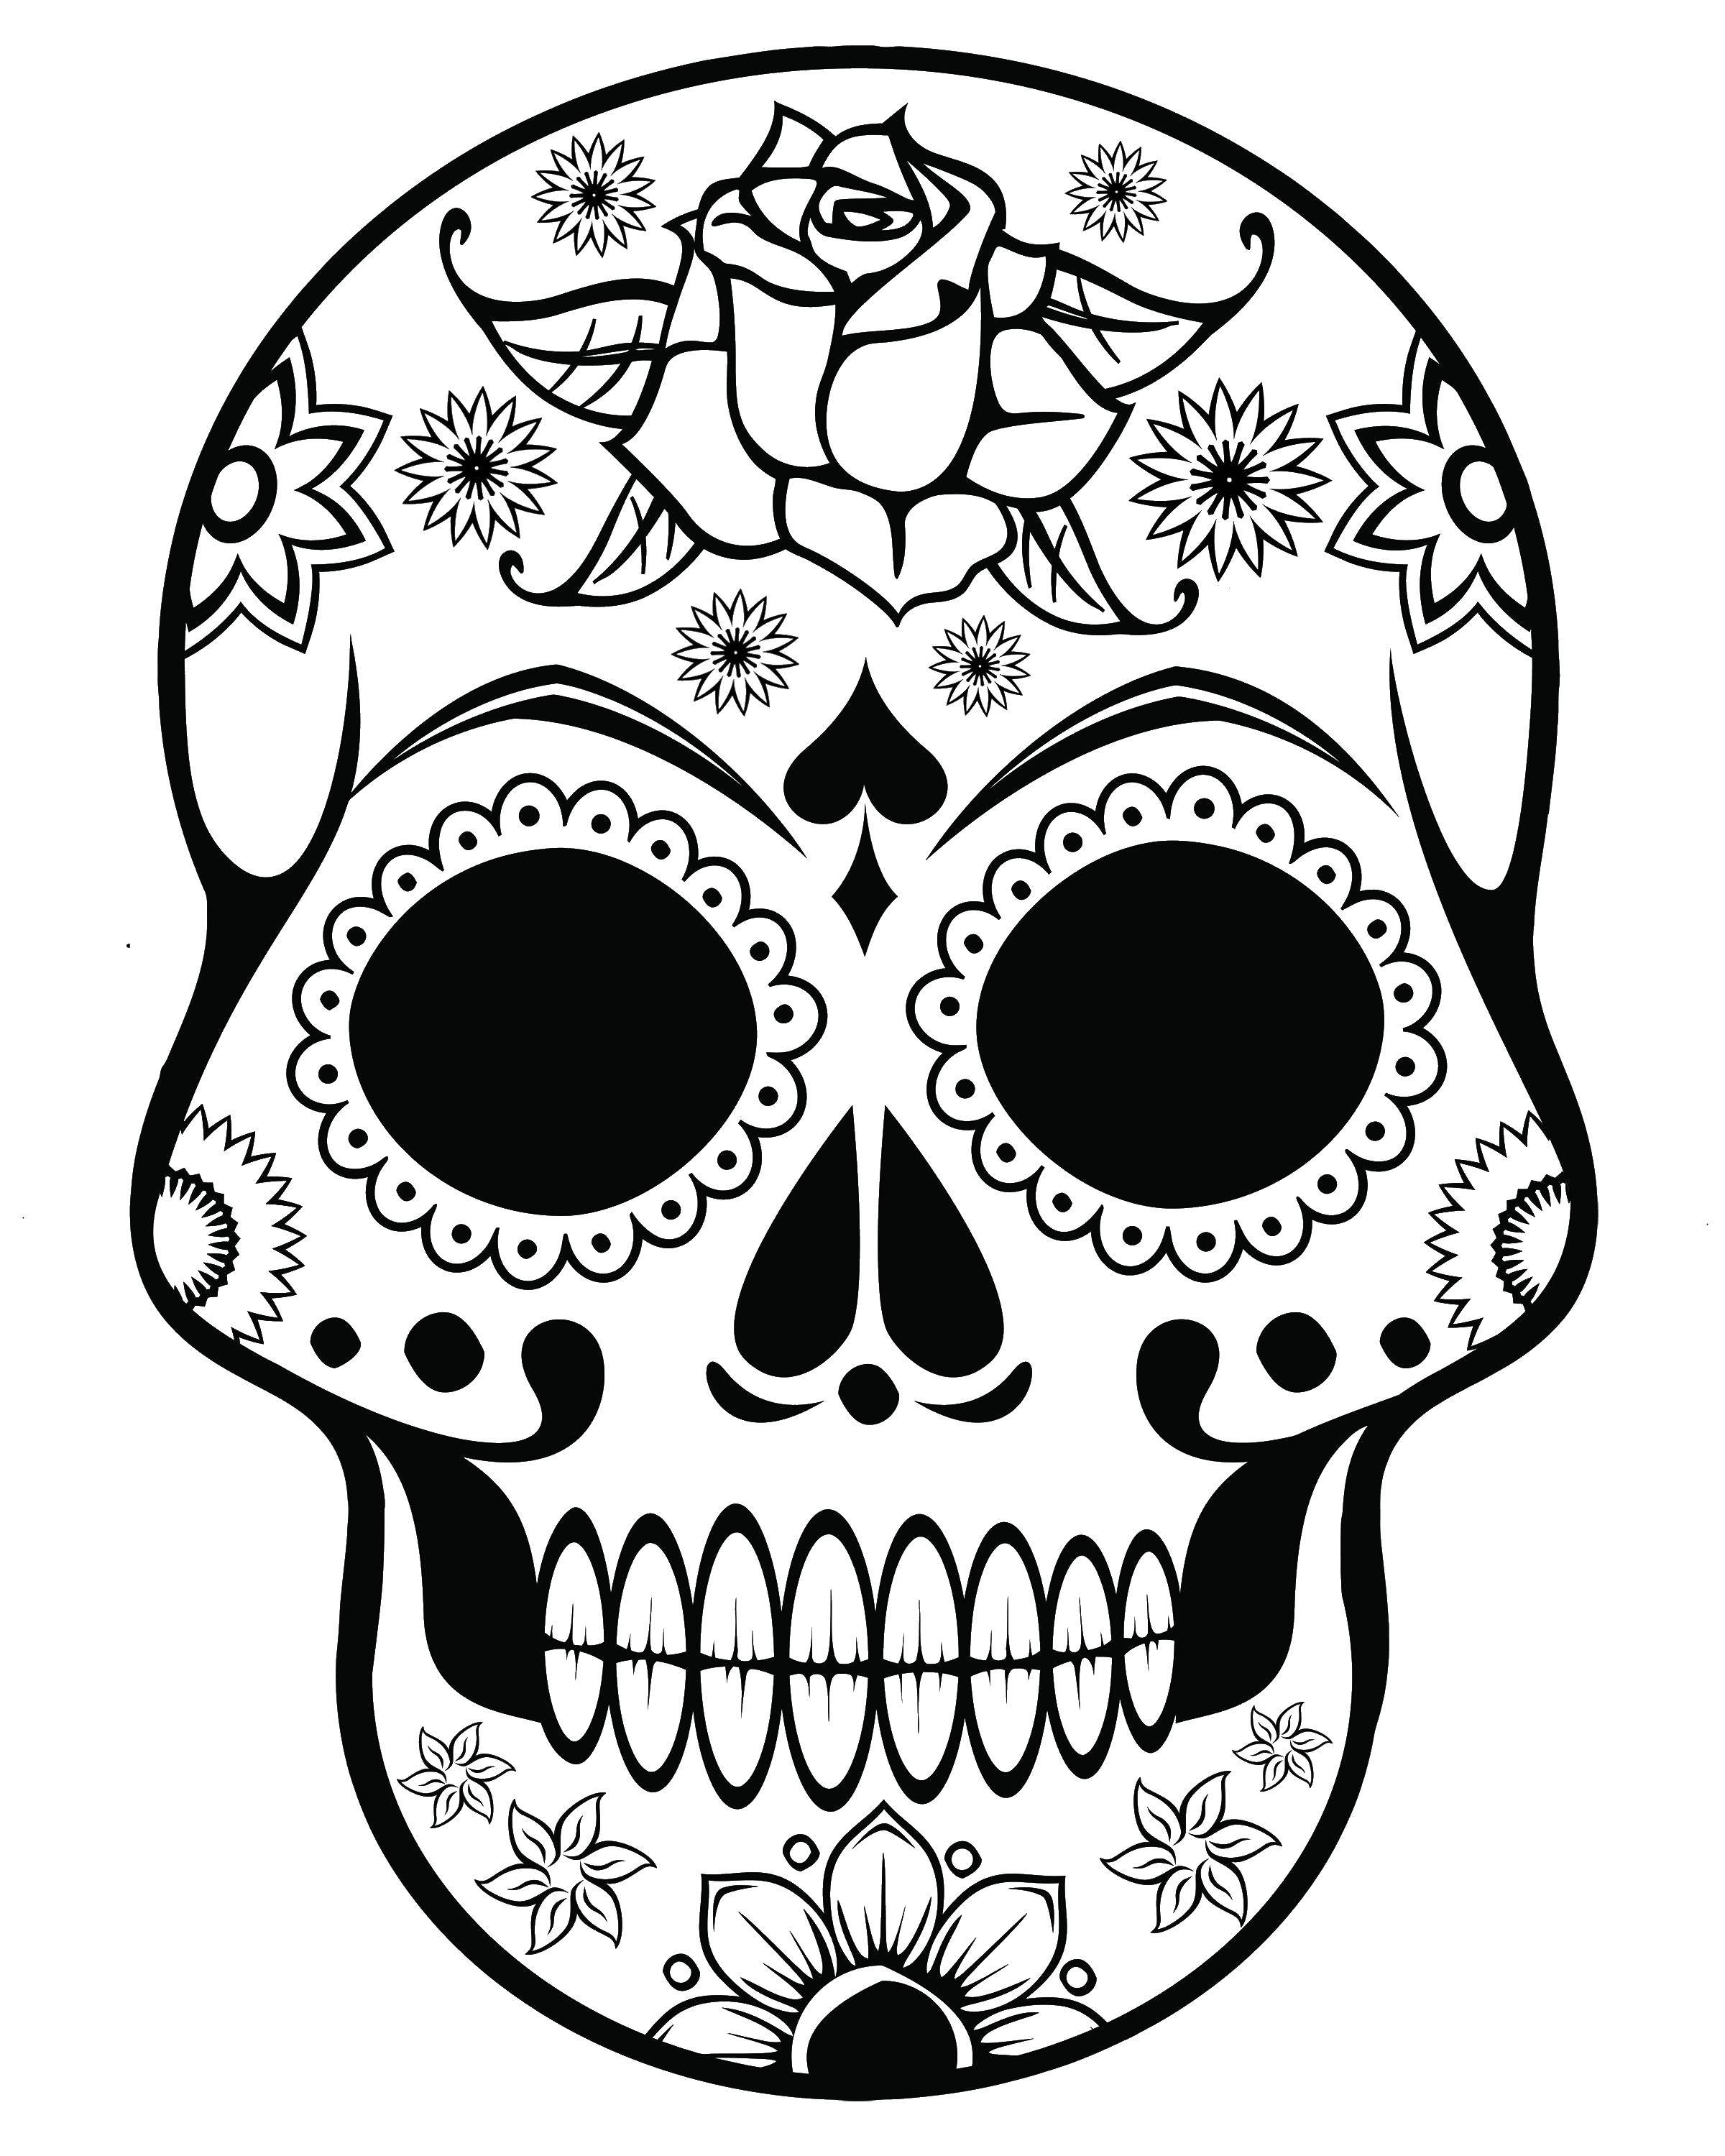 Coloring Skull with rose. Category Skull. Tags:  skull, flowers, patterns, rose.